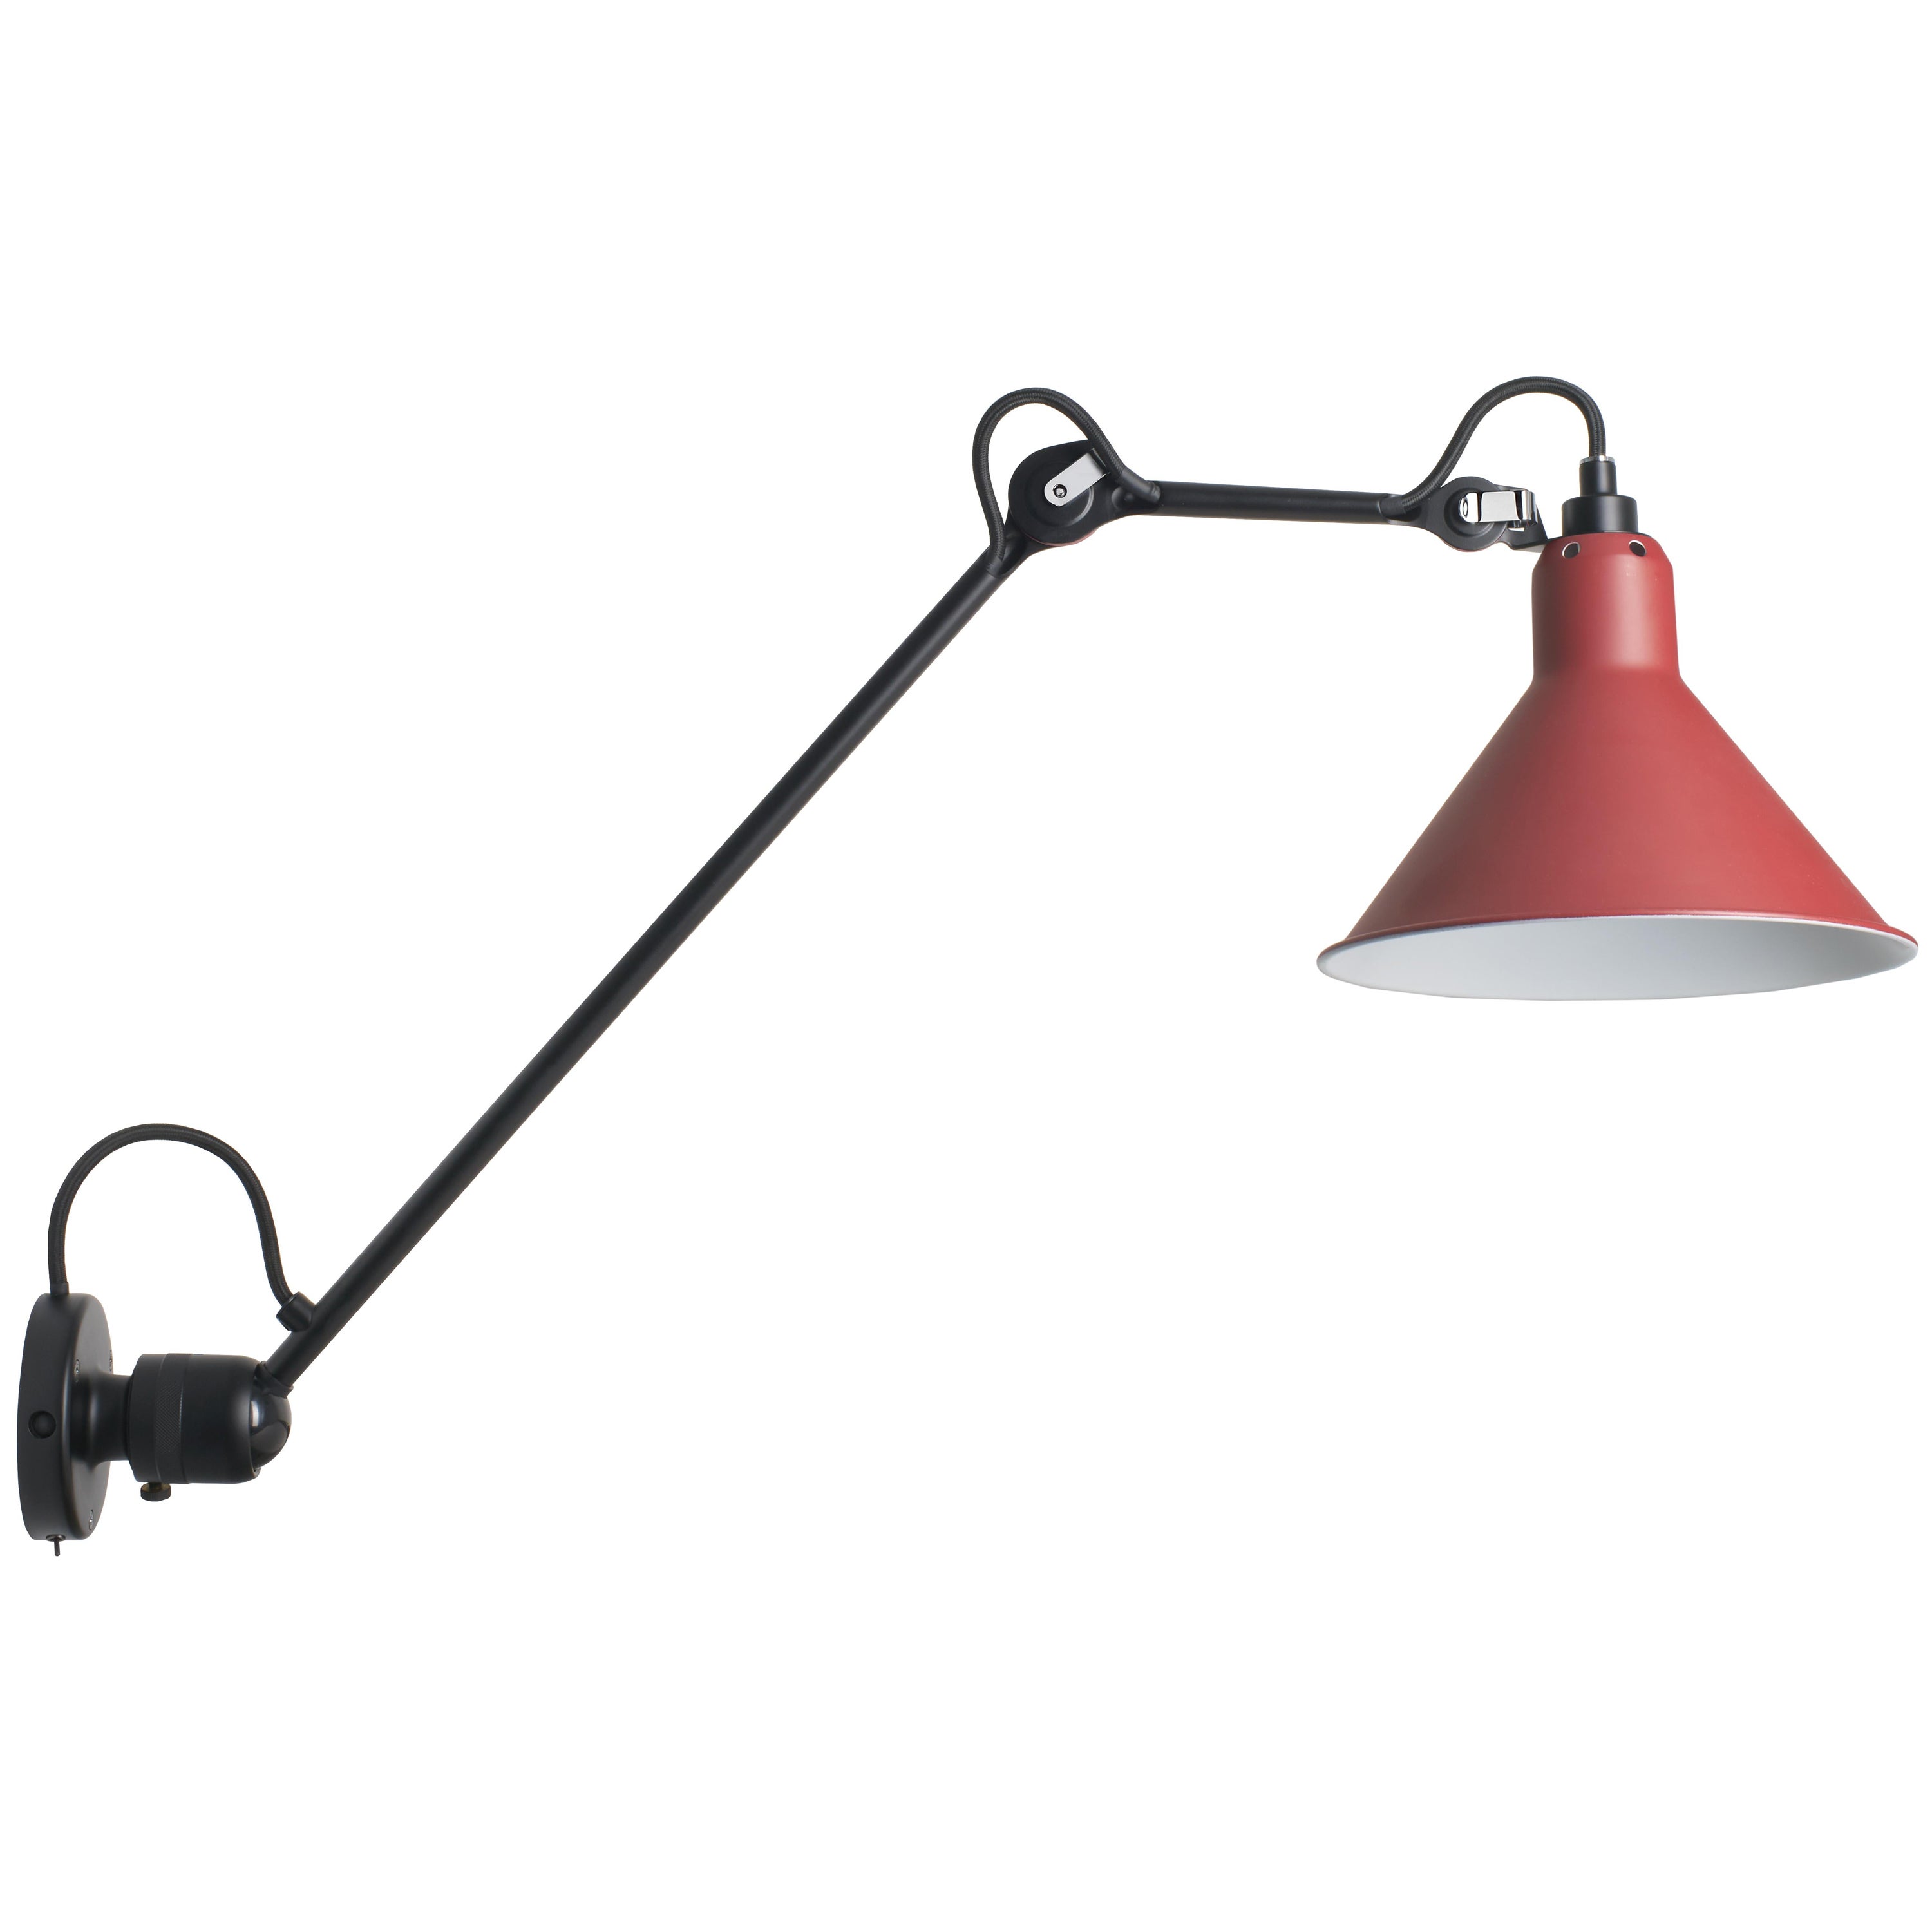 DCW Editions La Lampe Gras N°304 L40 SW Conic Wall Lamp in Red Shade